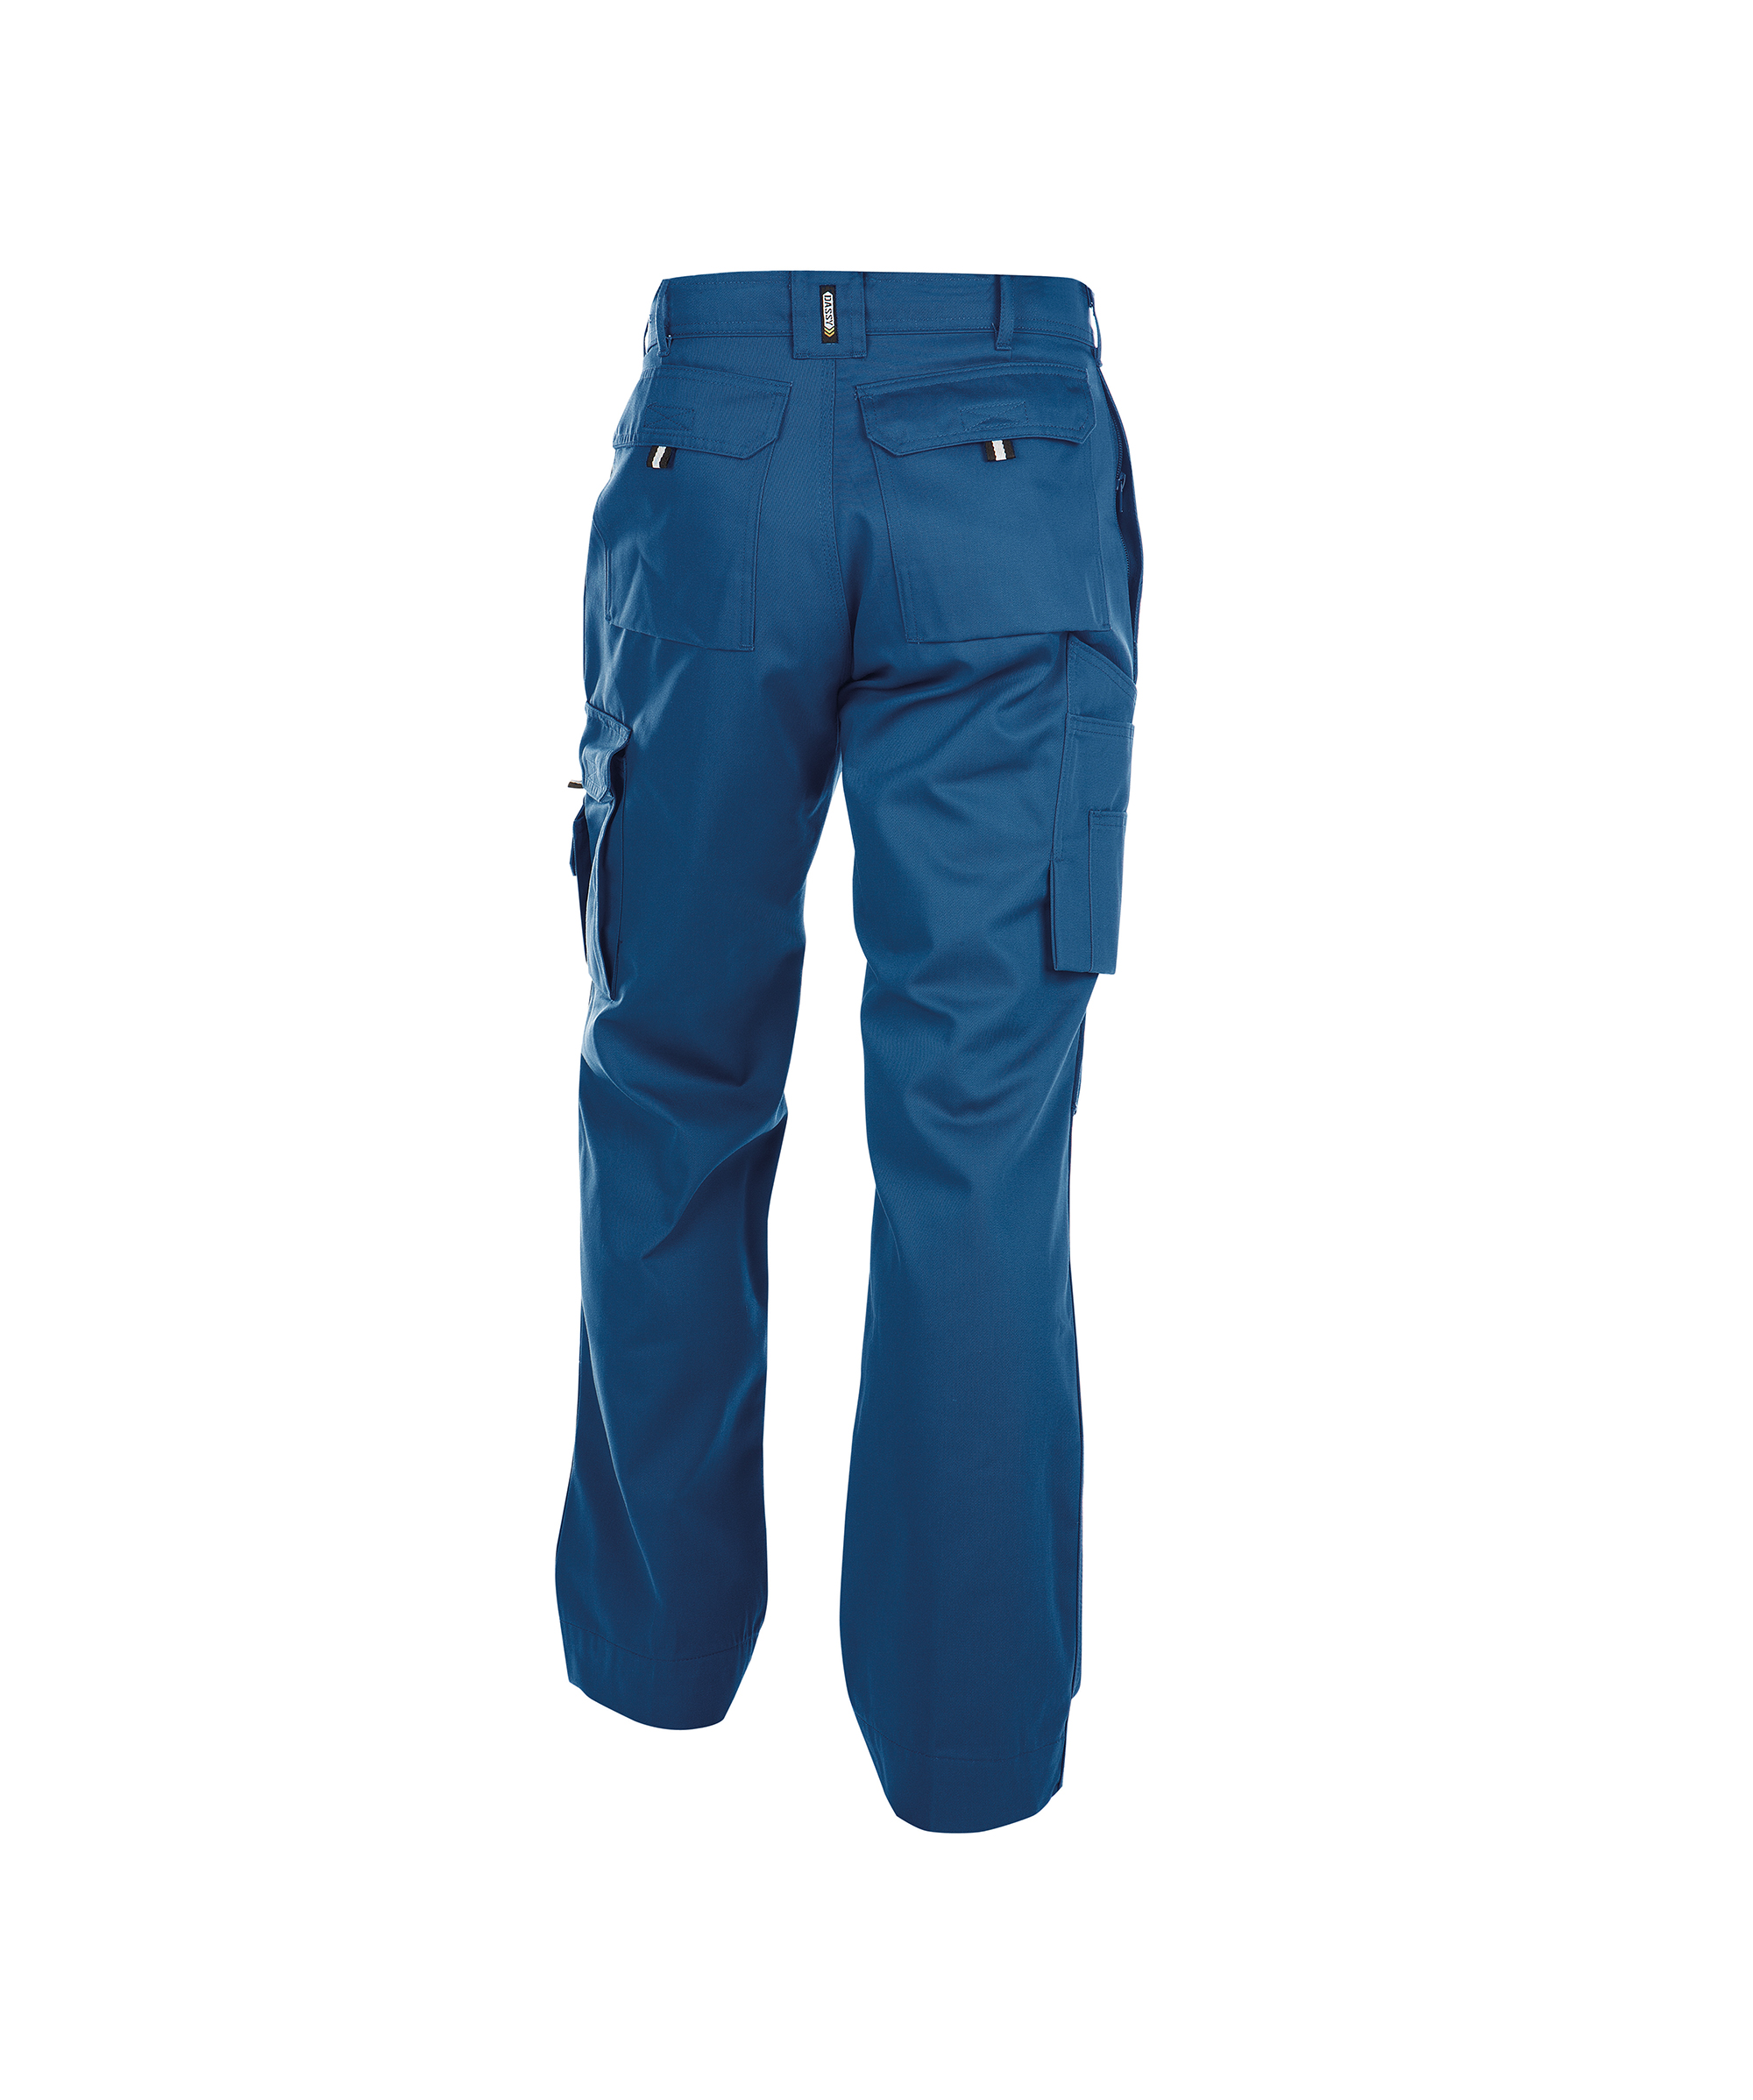 miami_work-trousers-with-knee-pockets_royal-blue_back.jpg